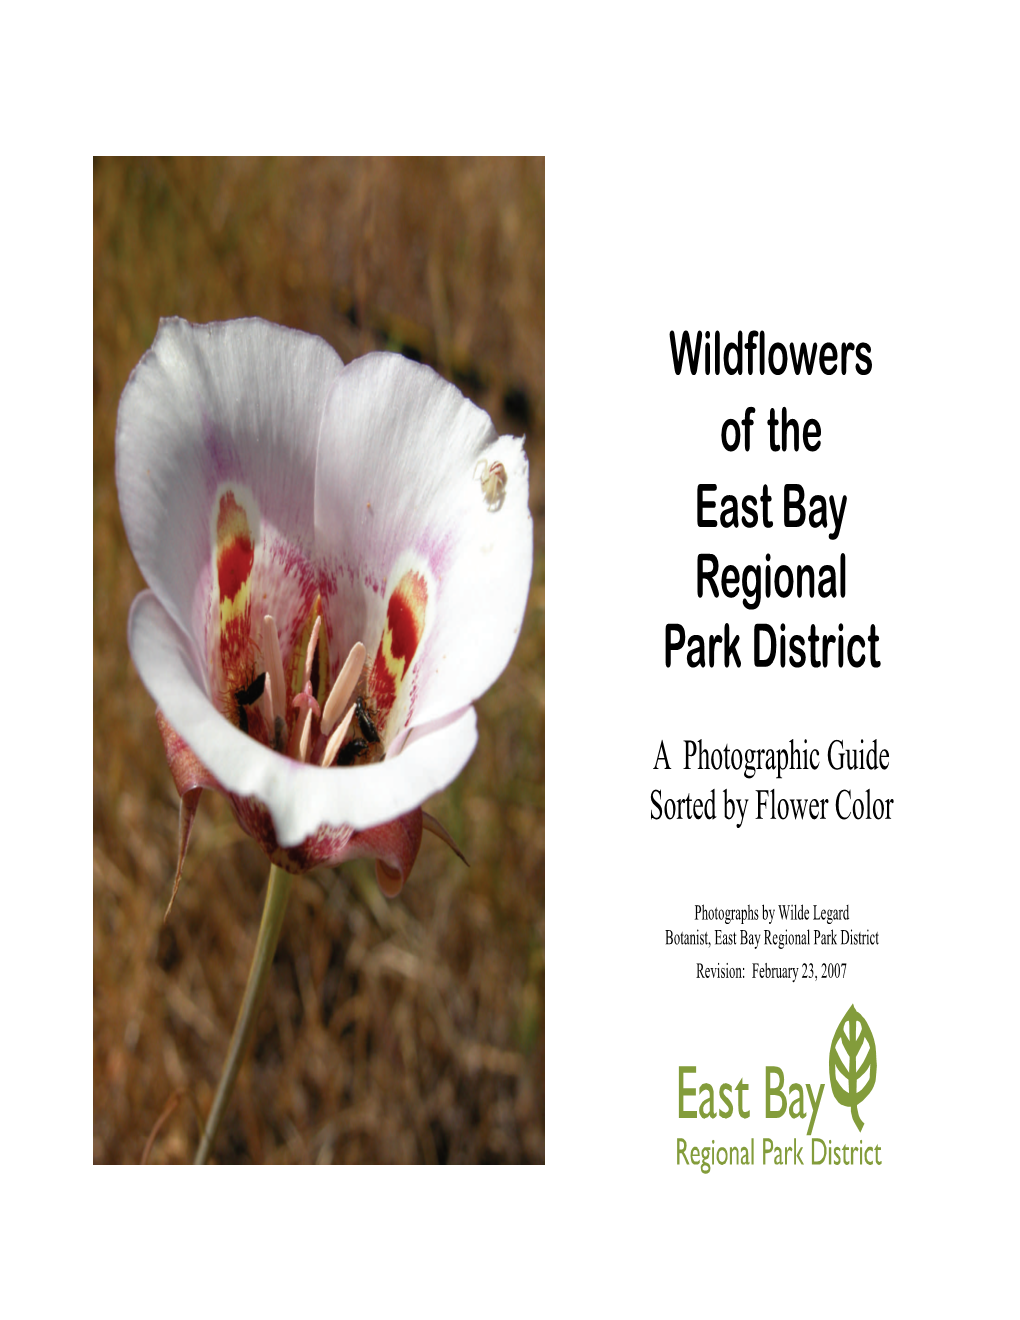 Wildflowers of the East Bay Regional Park District